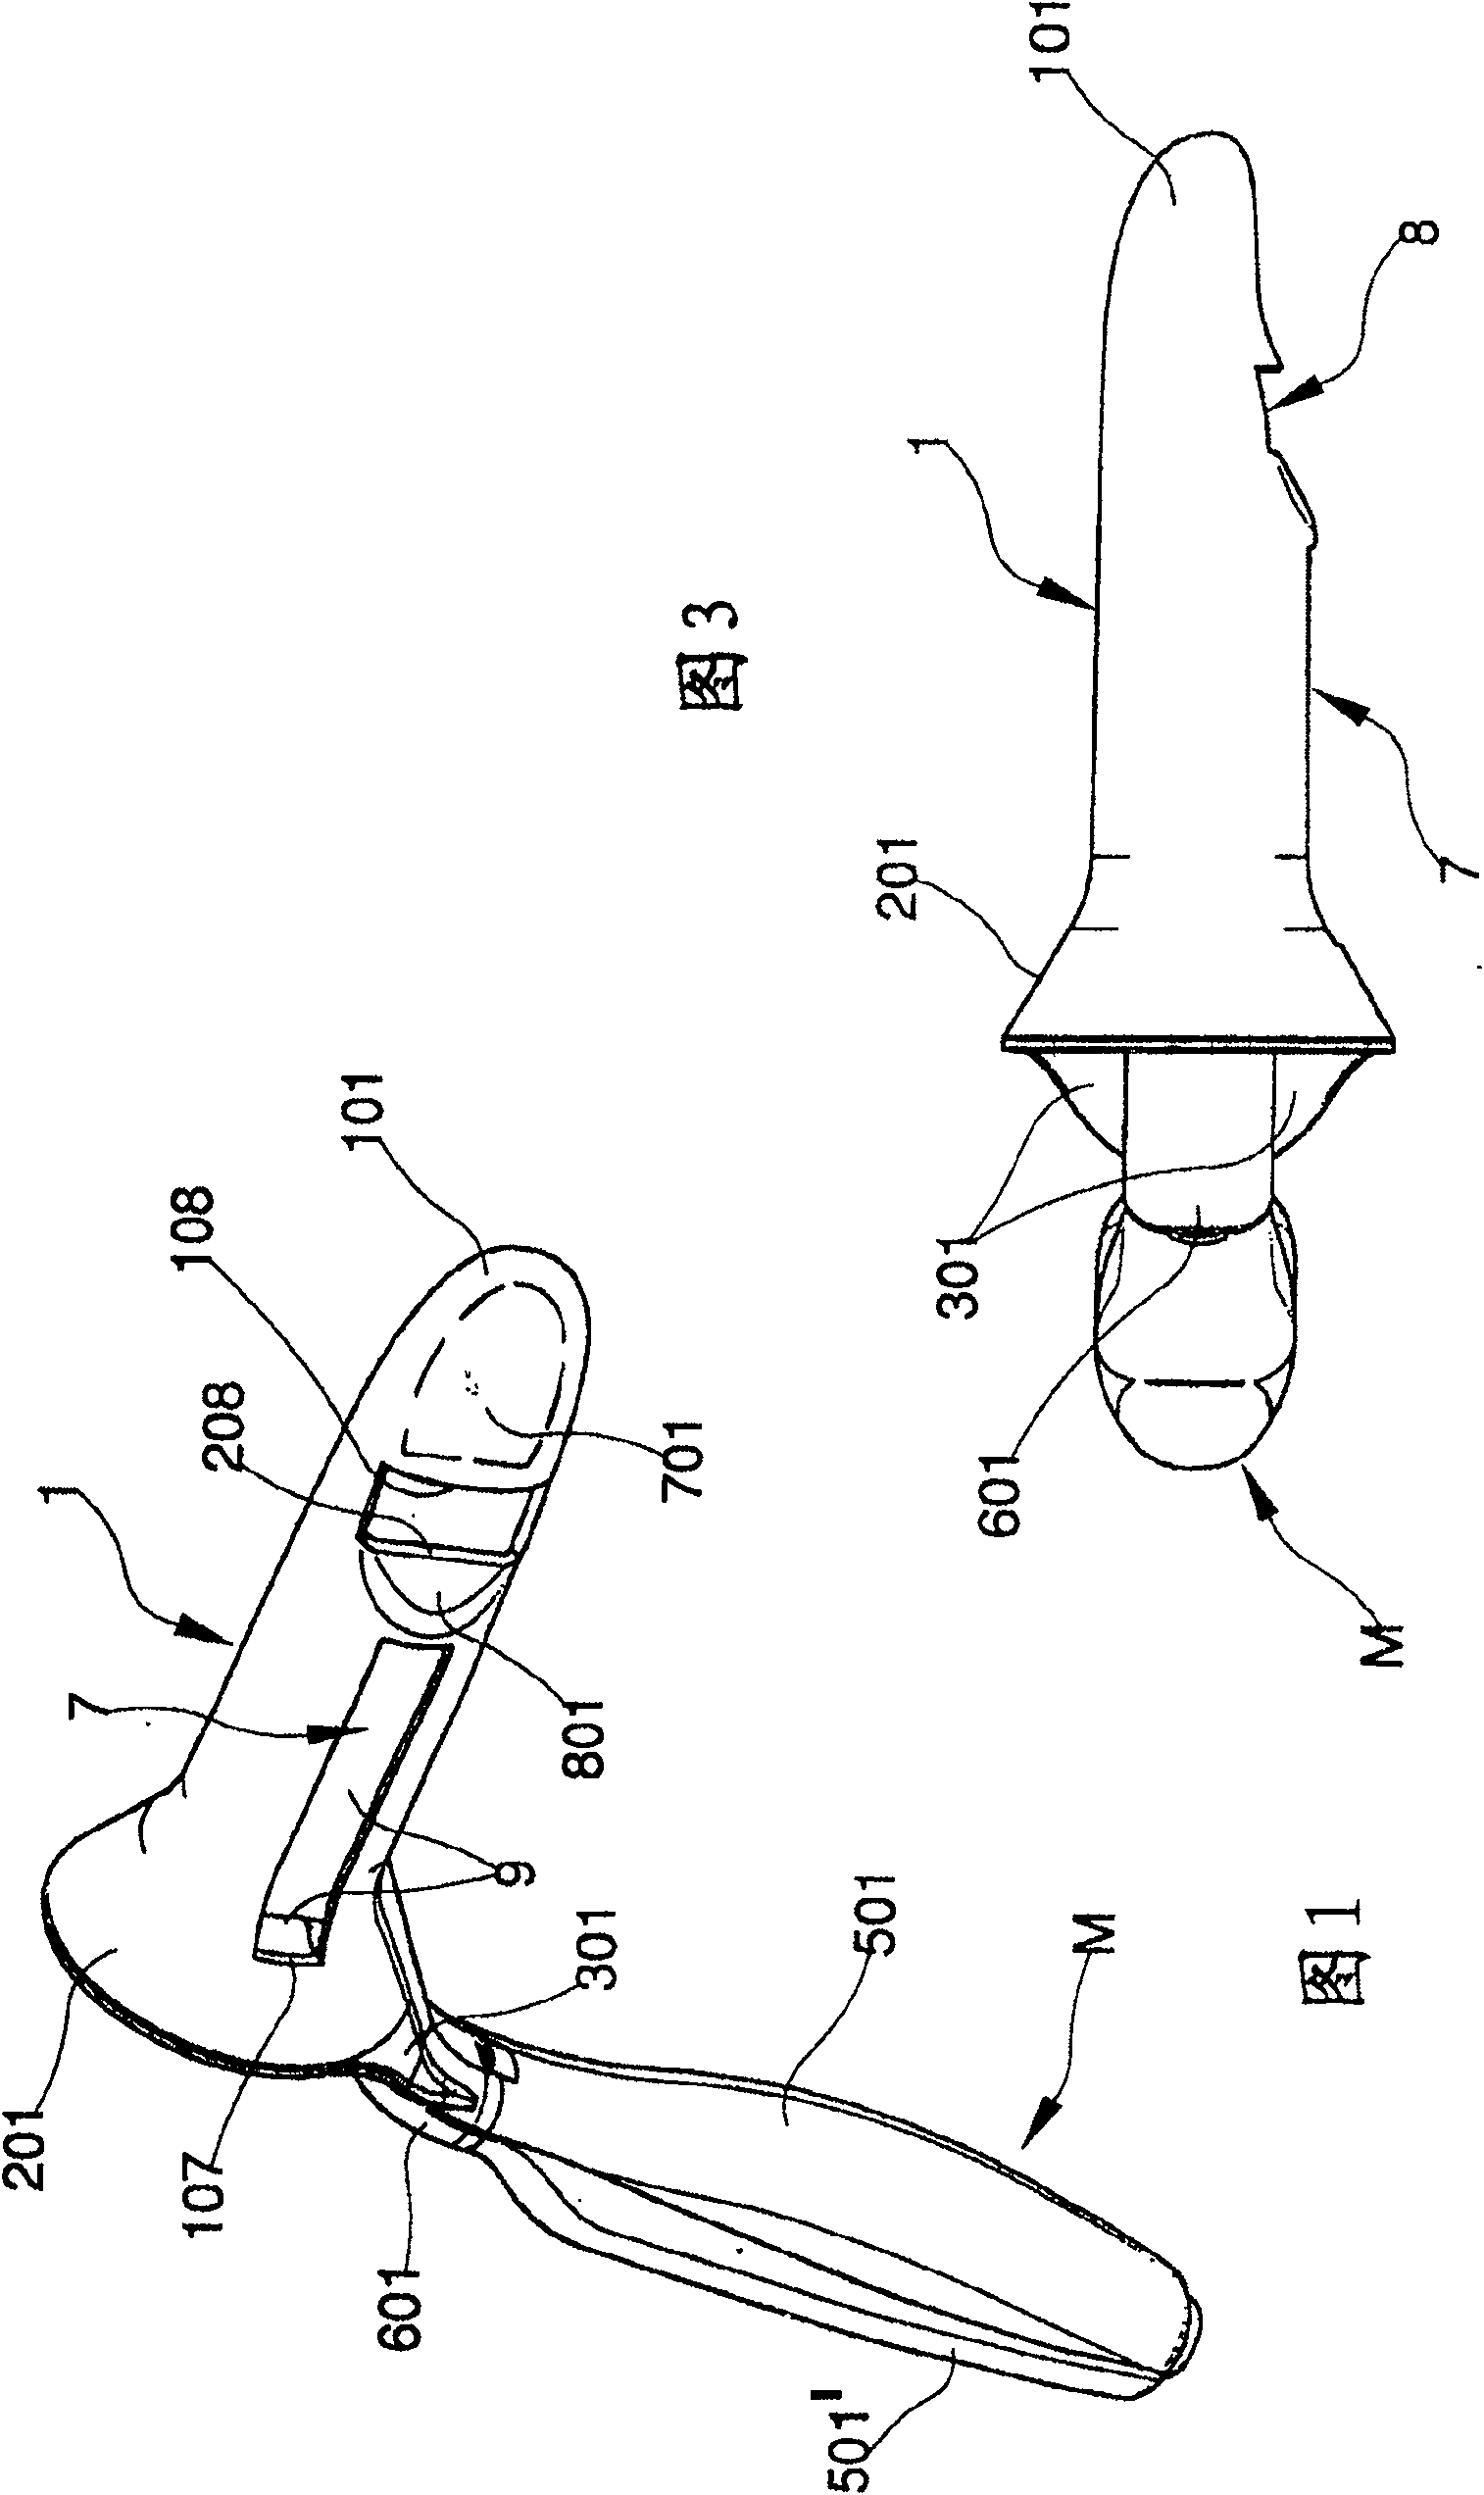 A retractor for operations on the arteria haemorroidalis